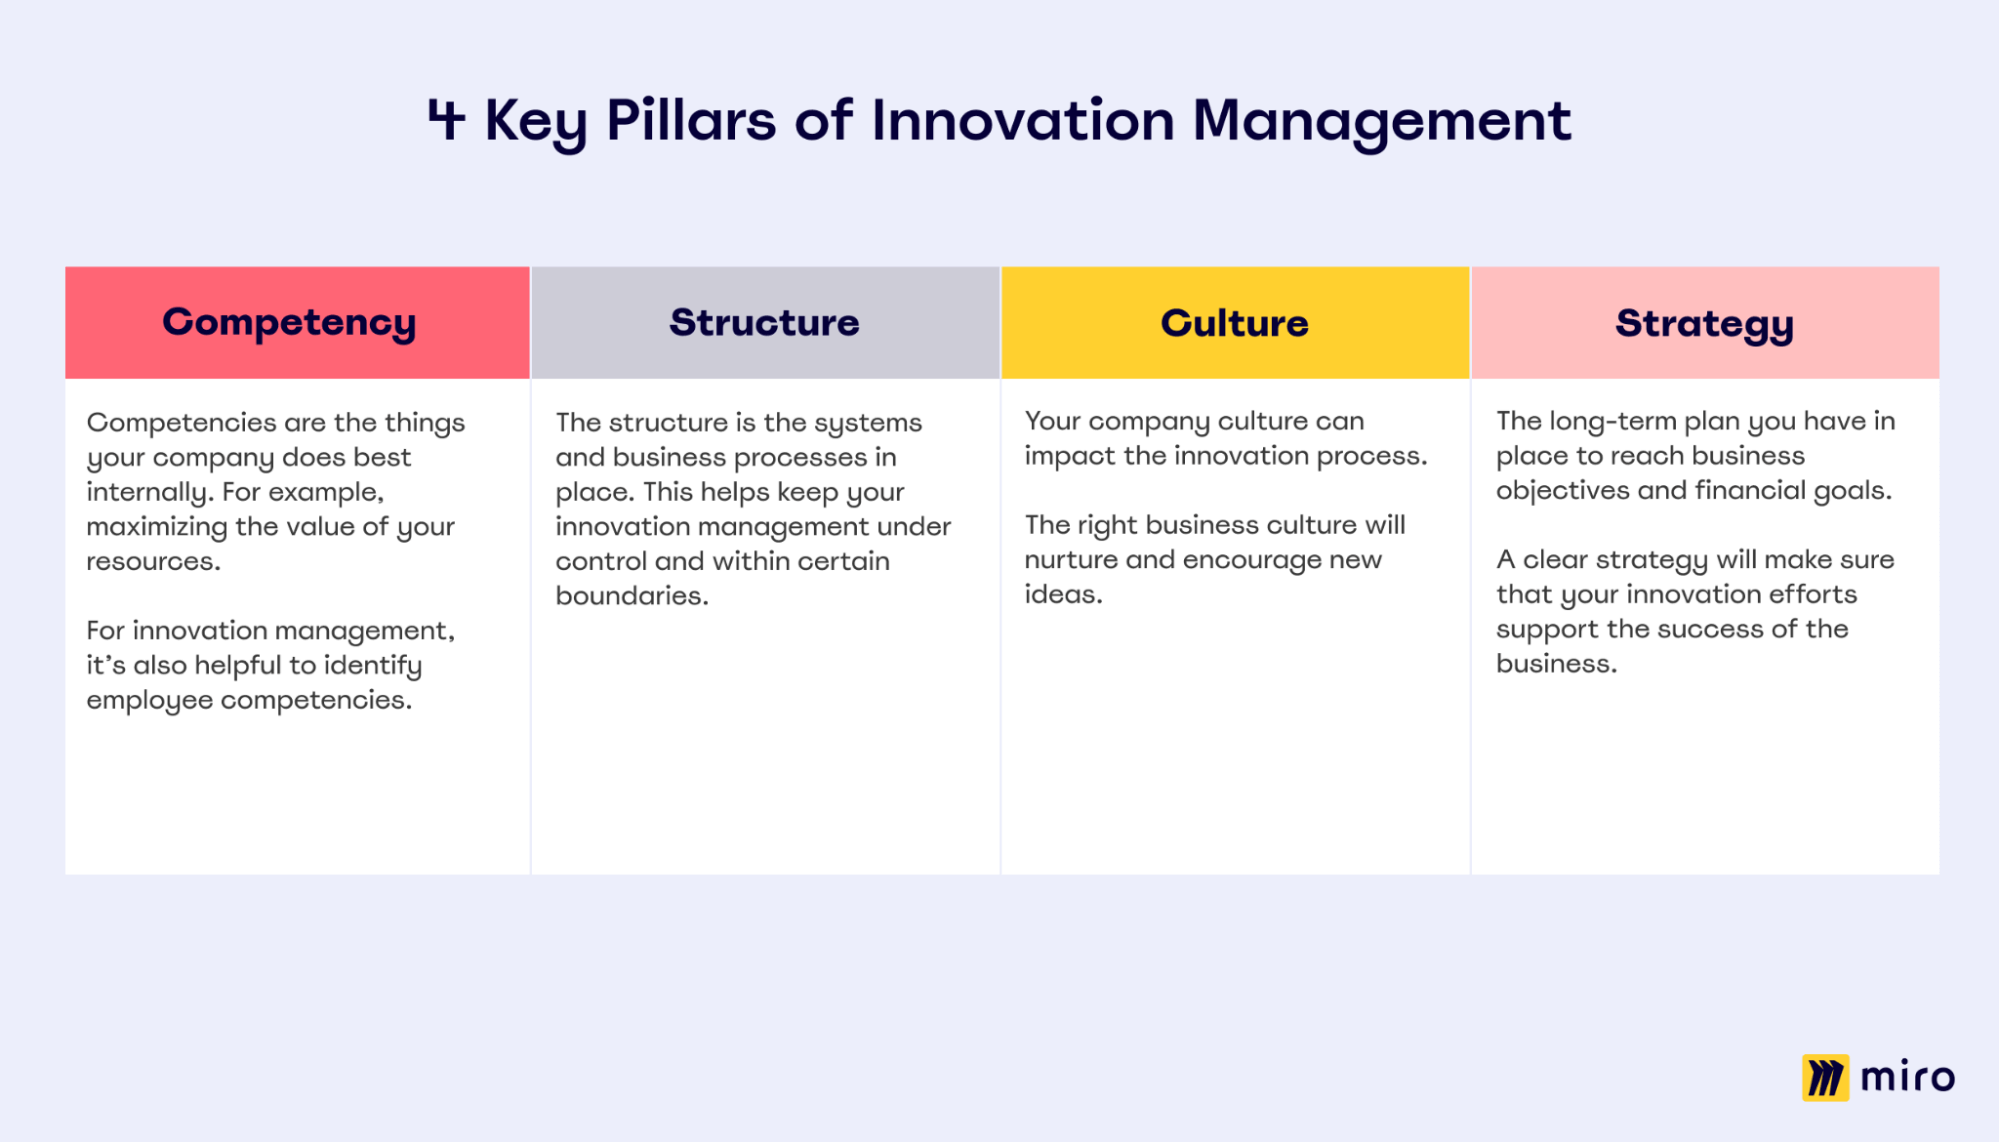 Table outlining the four key pillars of innovation management